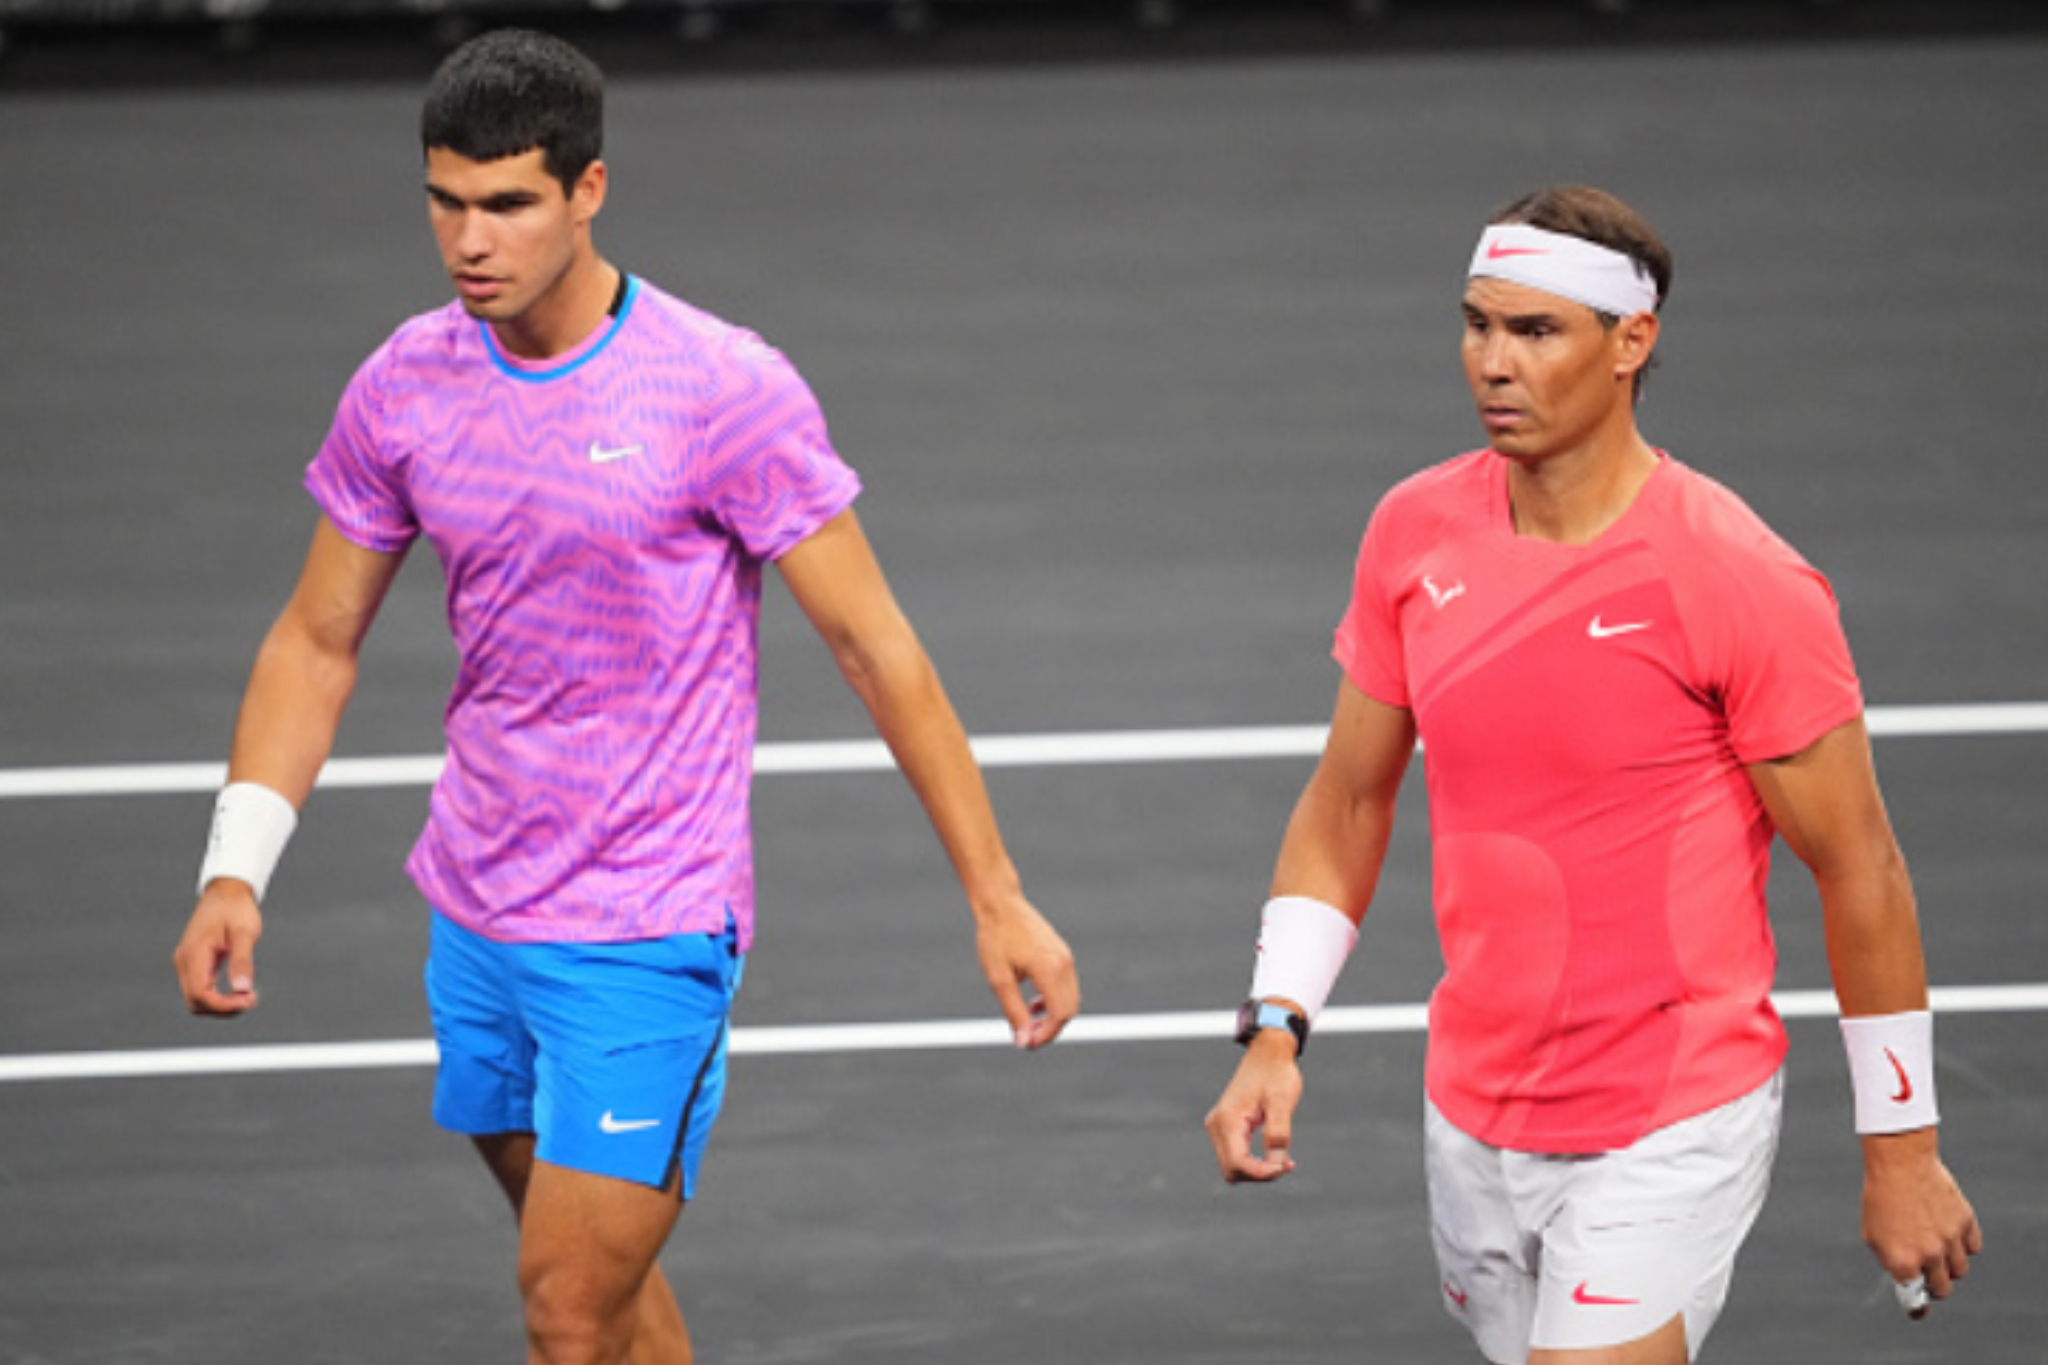 Nadal and Alcaraz had huge appearance fees to play the “Netflix slam”